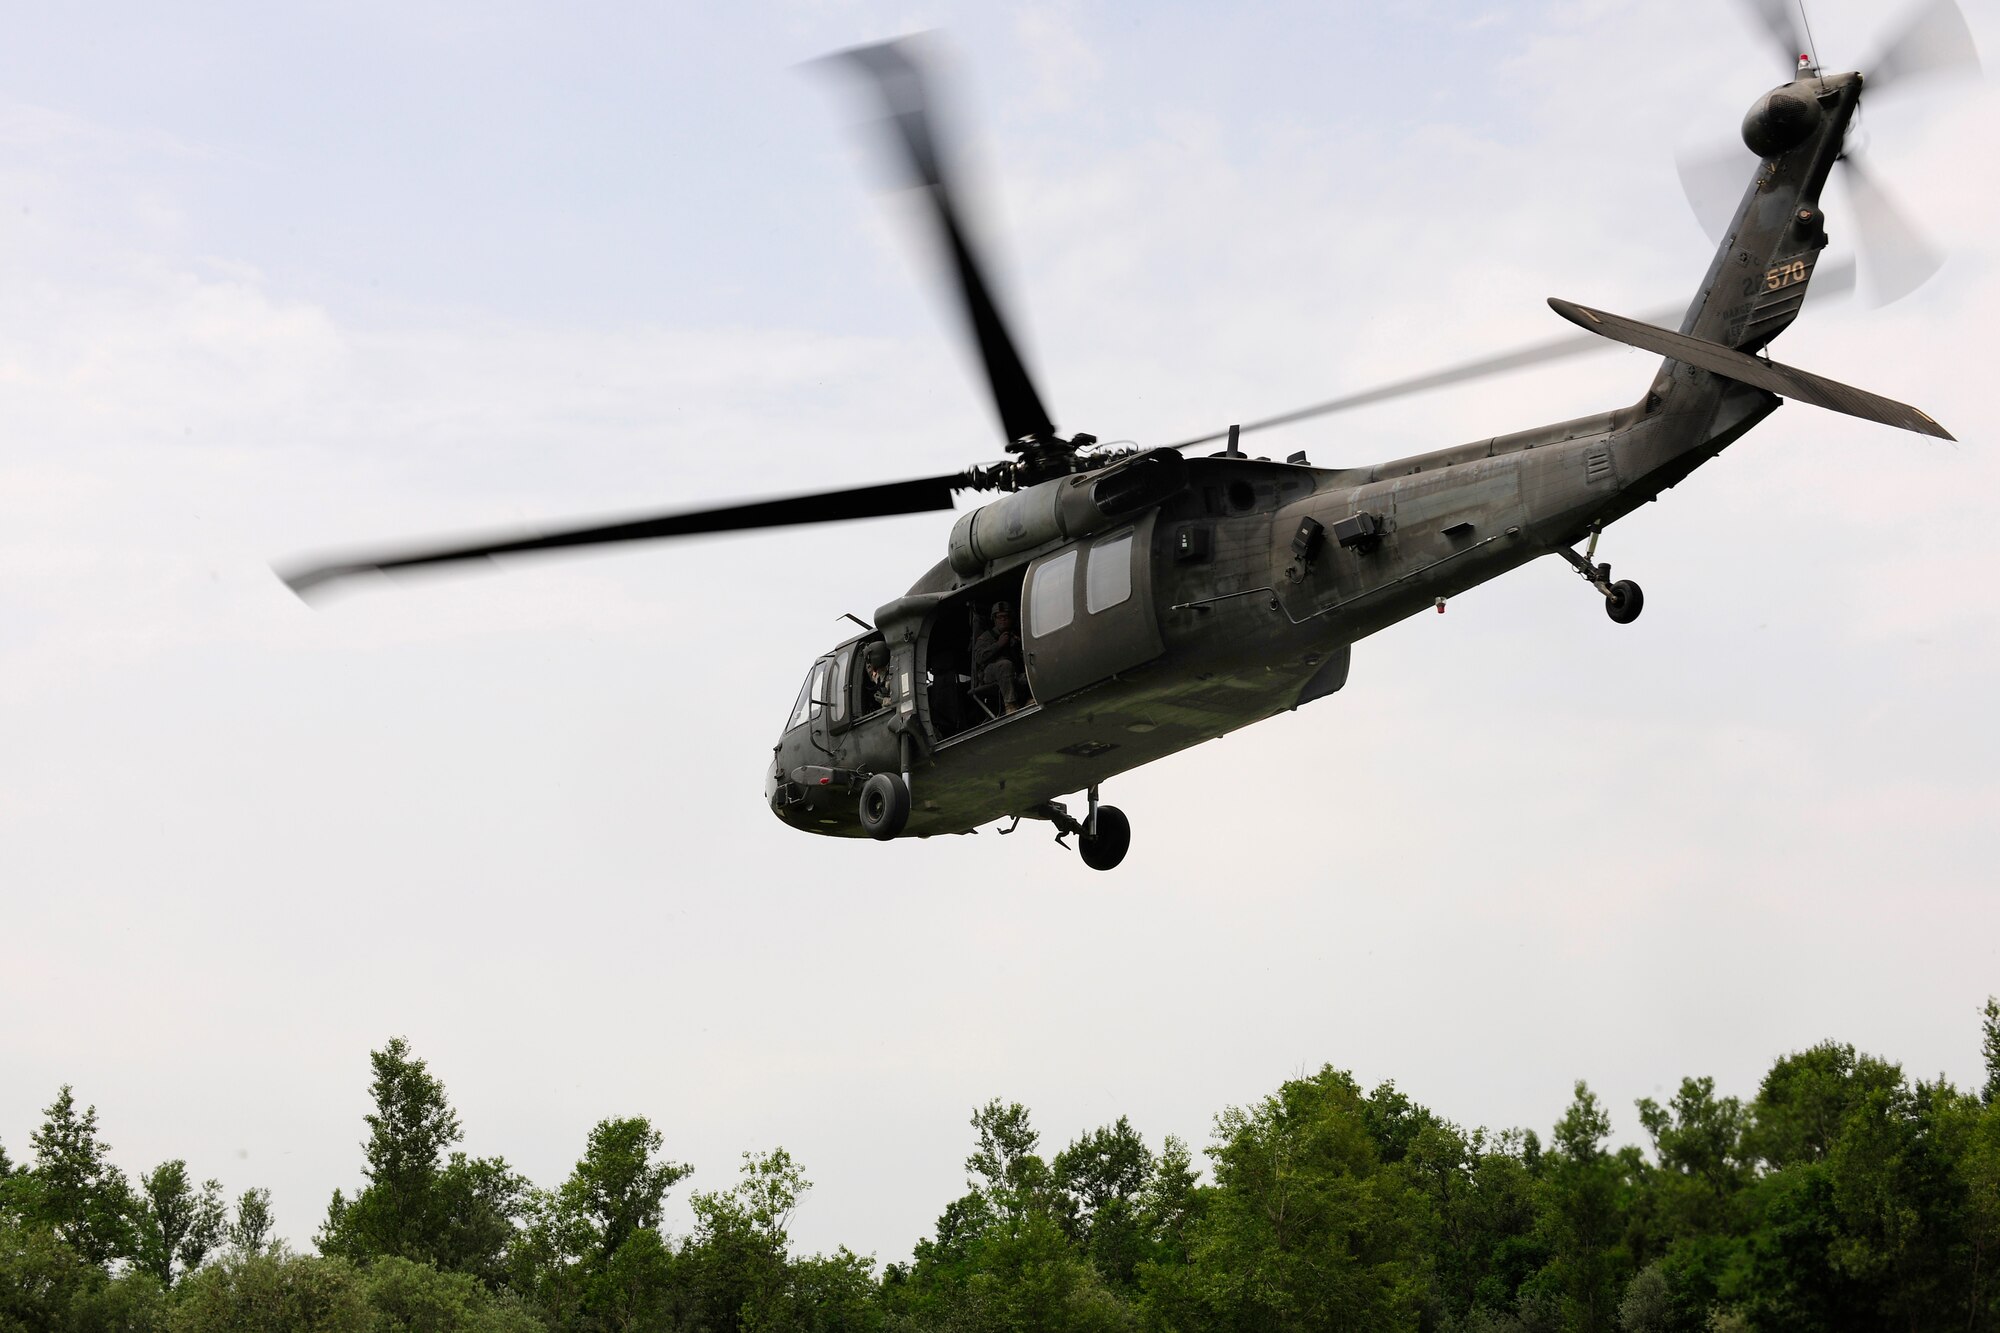 A UH-60 Black Hawk helicopter approaches the landing zone during a combat search and rescue training mission, June 24, 2014, at Cellina Meduna training ground near Maniago, Italy. Establishing a good relationship with other branches of the U.S. military helps mitigate risk and confusion in the event of a real-world situation requiring military intervention and assistance. (U.S. Air Force photo/Airman 1st Class Ryan Conroy)